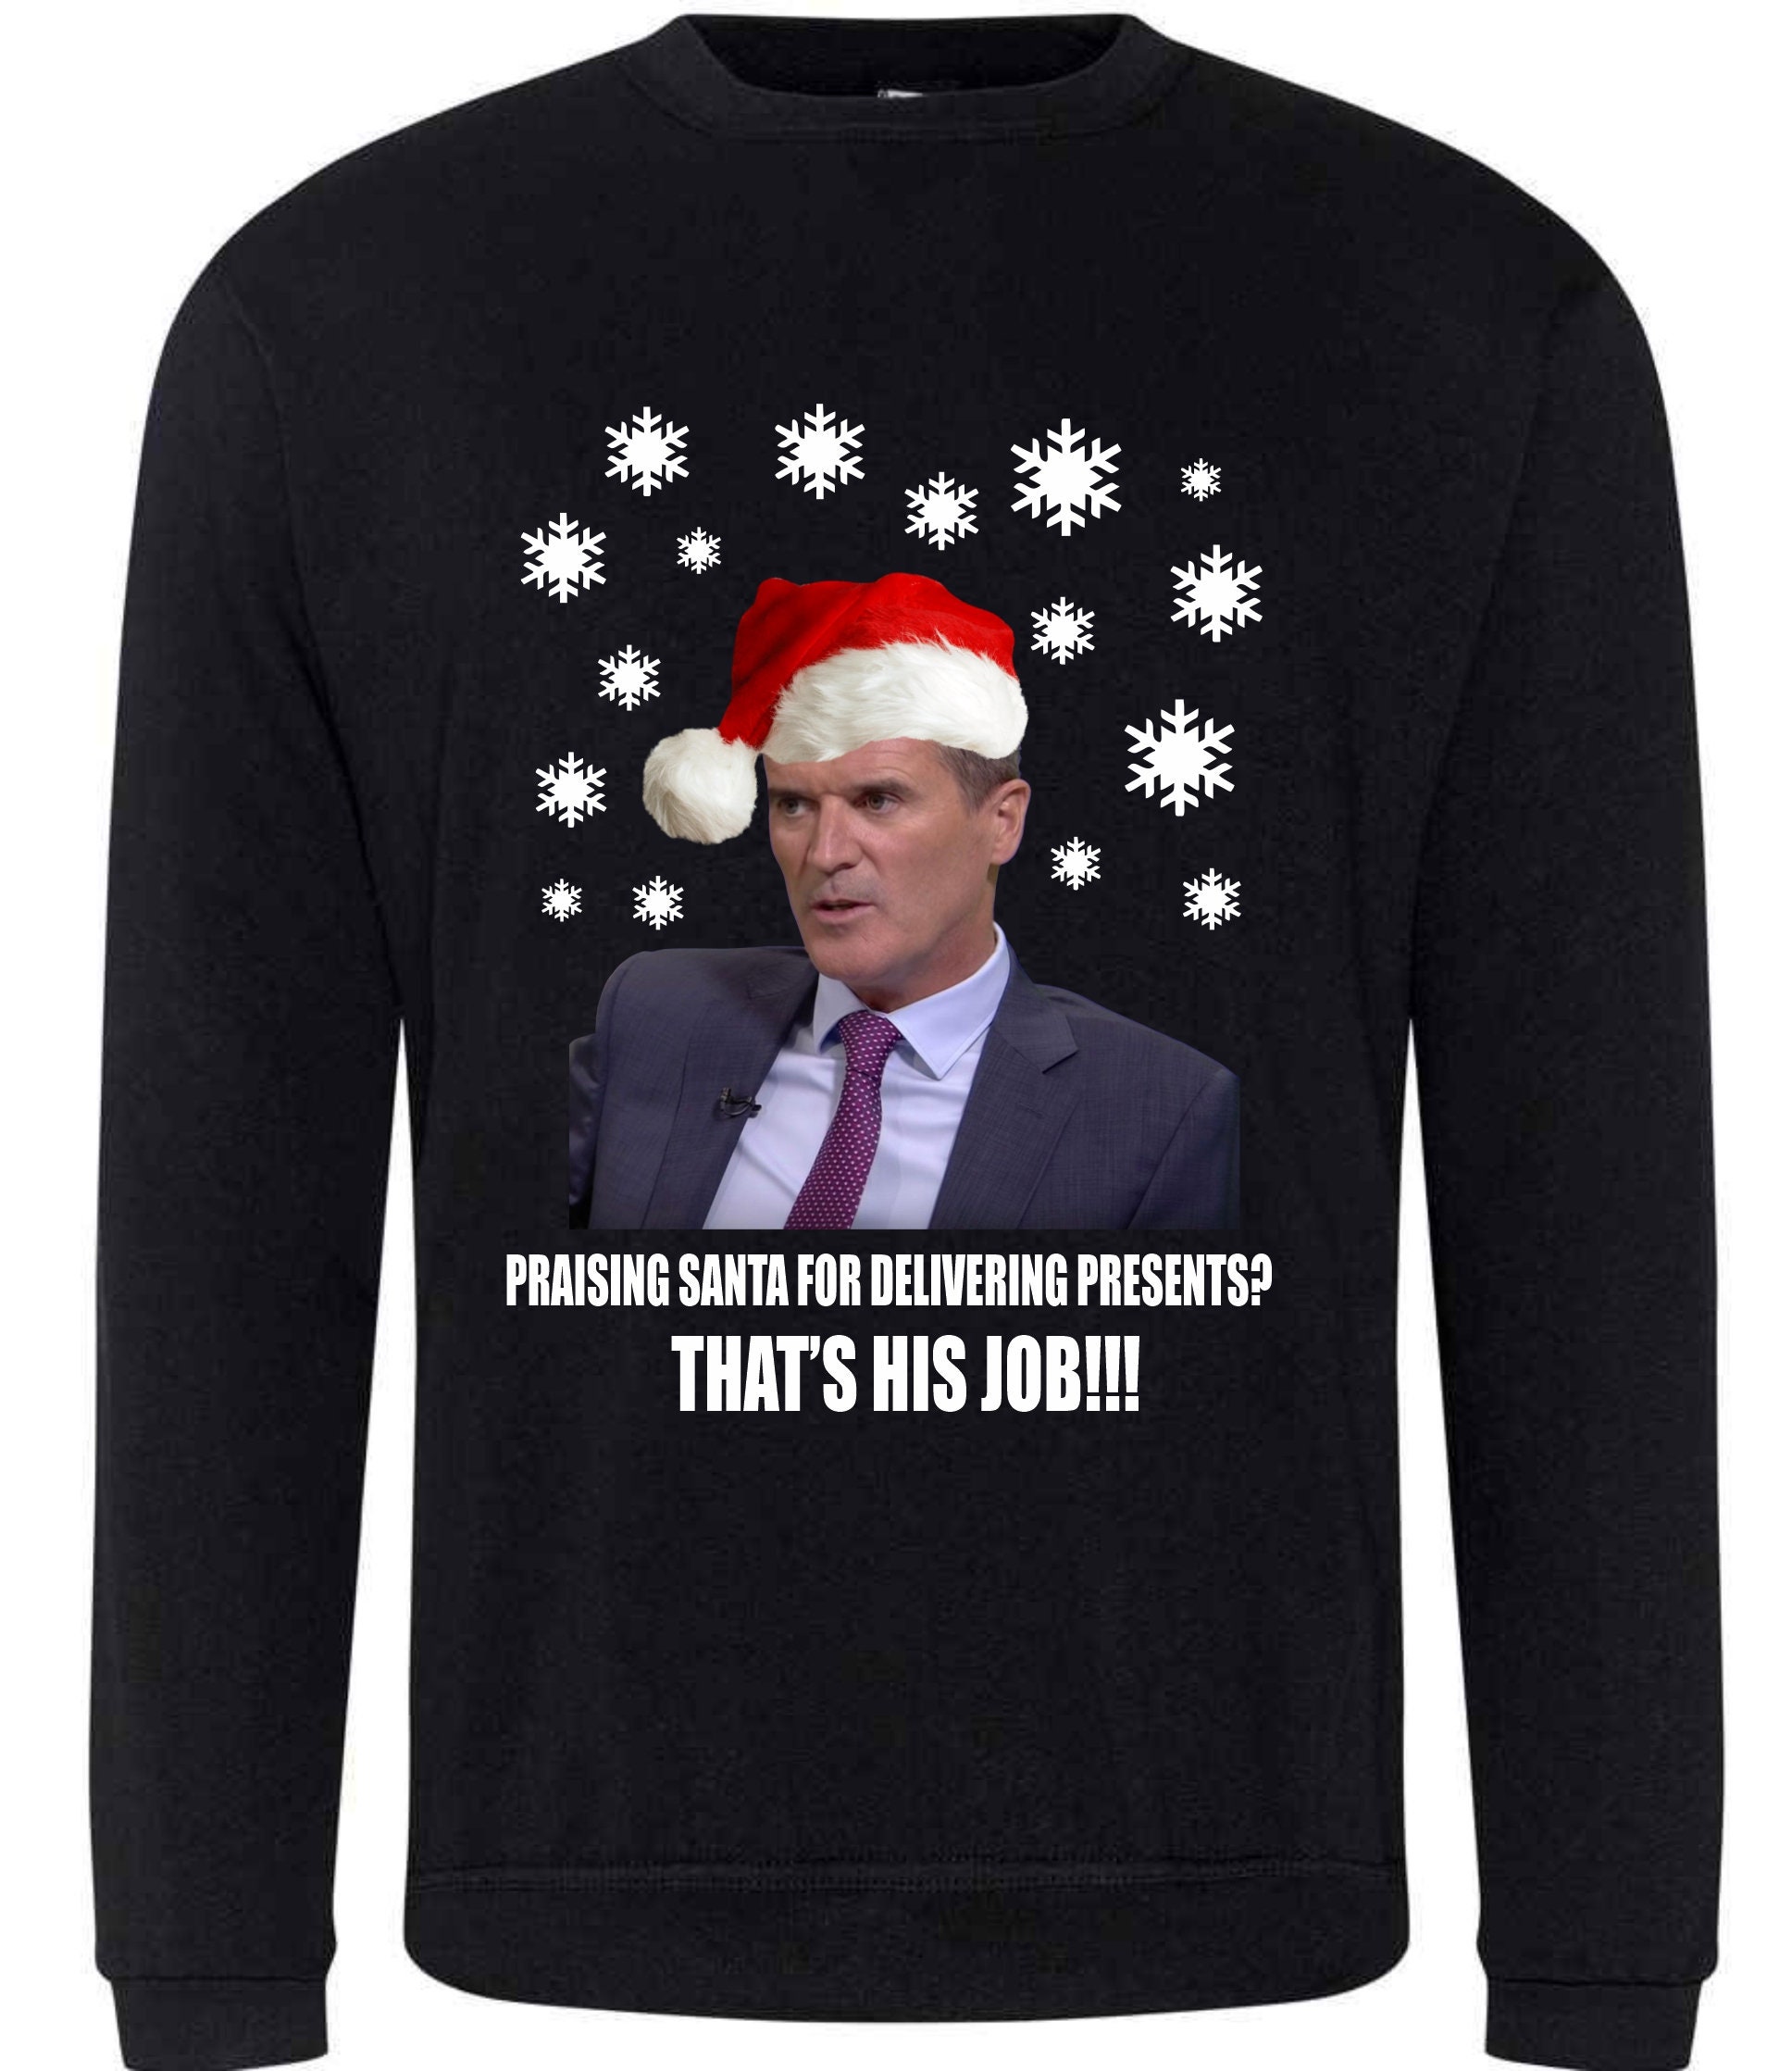 Discover Praising Santa For Delivering Presents, That's His Job, Roy Keane Funny Christmas sweater